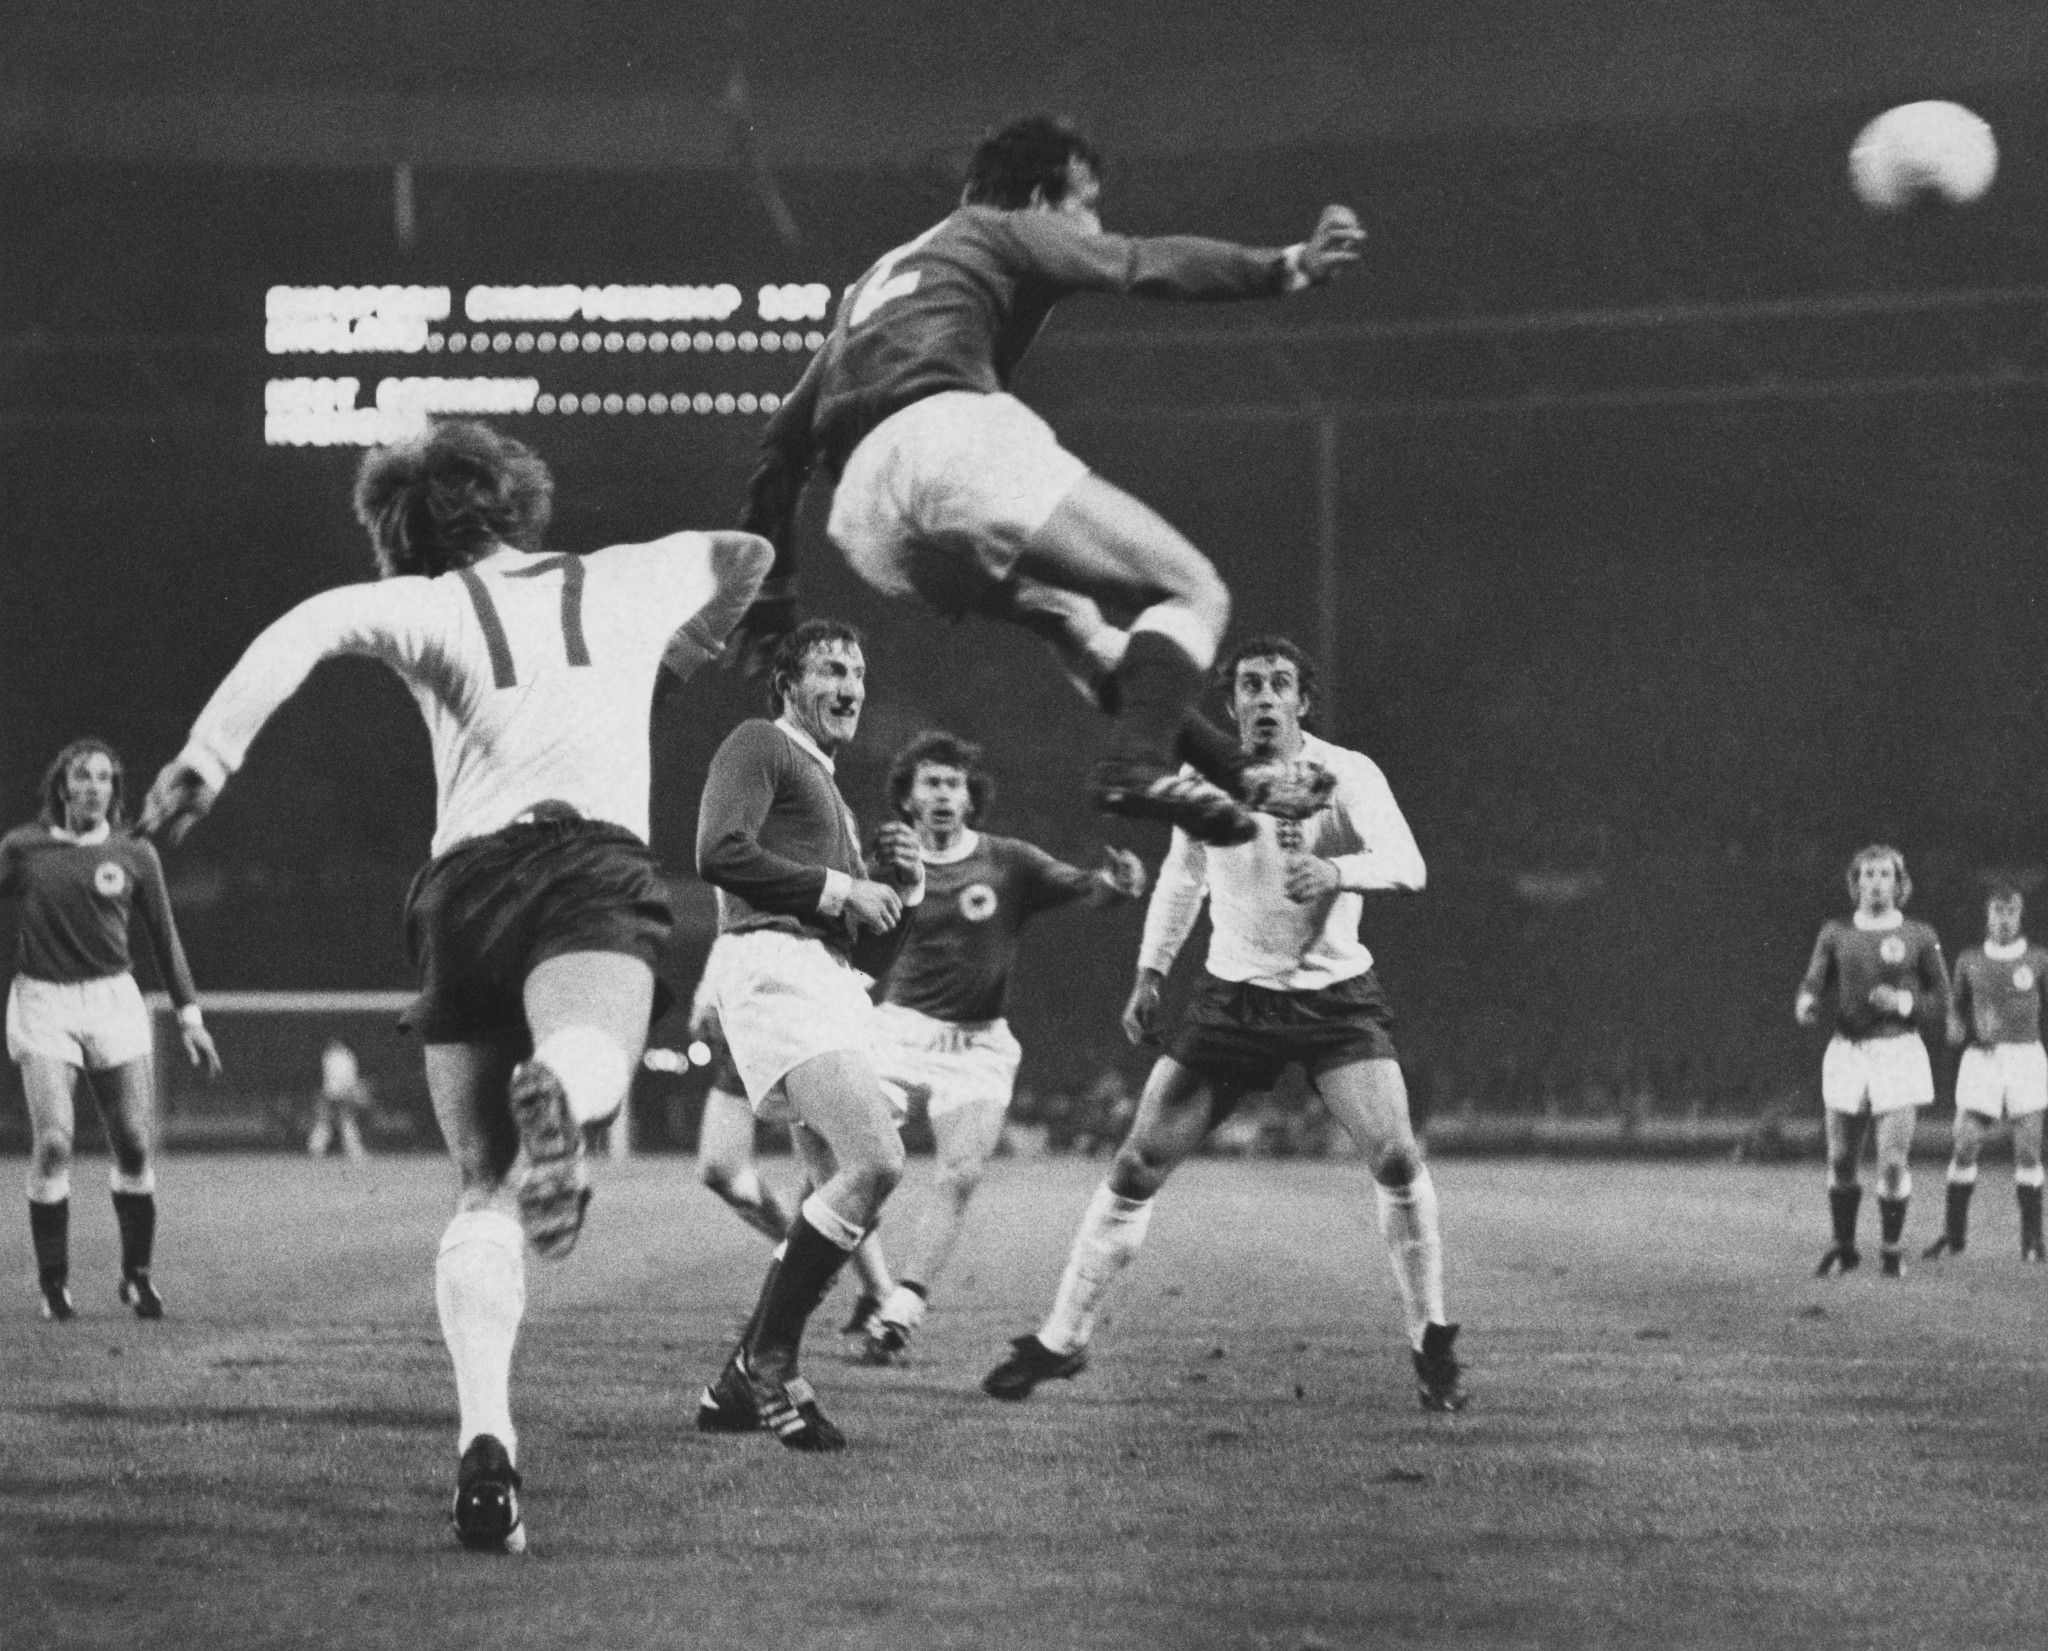 The 1972 European Championship quarter-final was the resumption of a great football rivalry between England and West Germany ©Getty Images